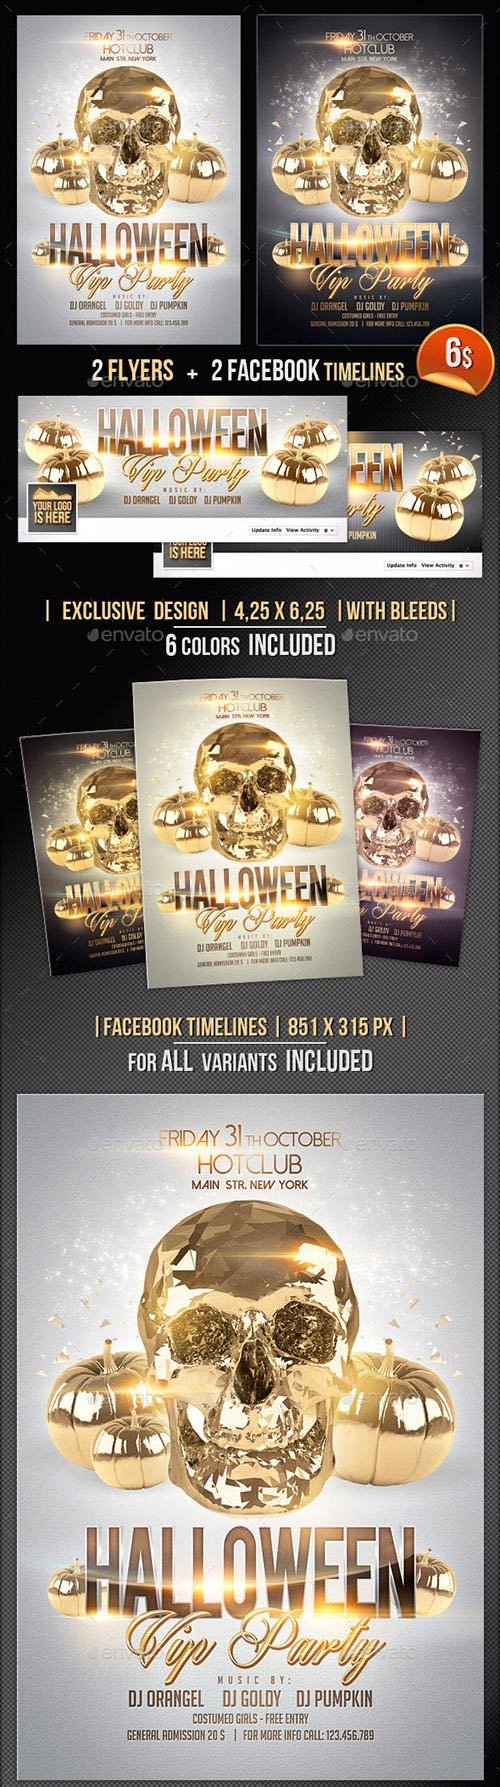 GraphicRiver - Halloween Flyer + Fb Timeline Vip Party